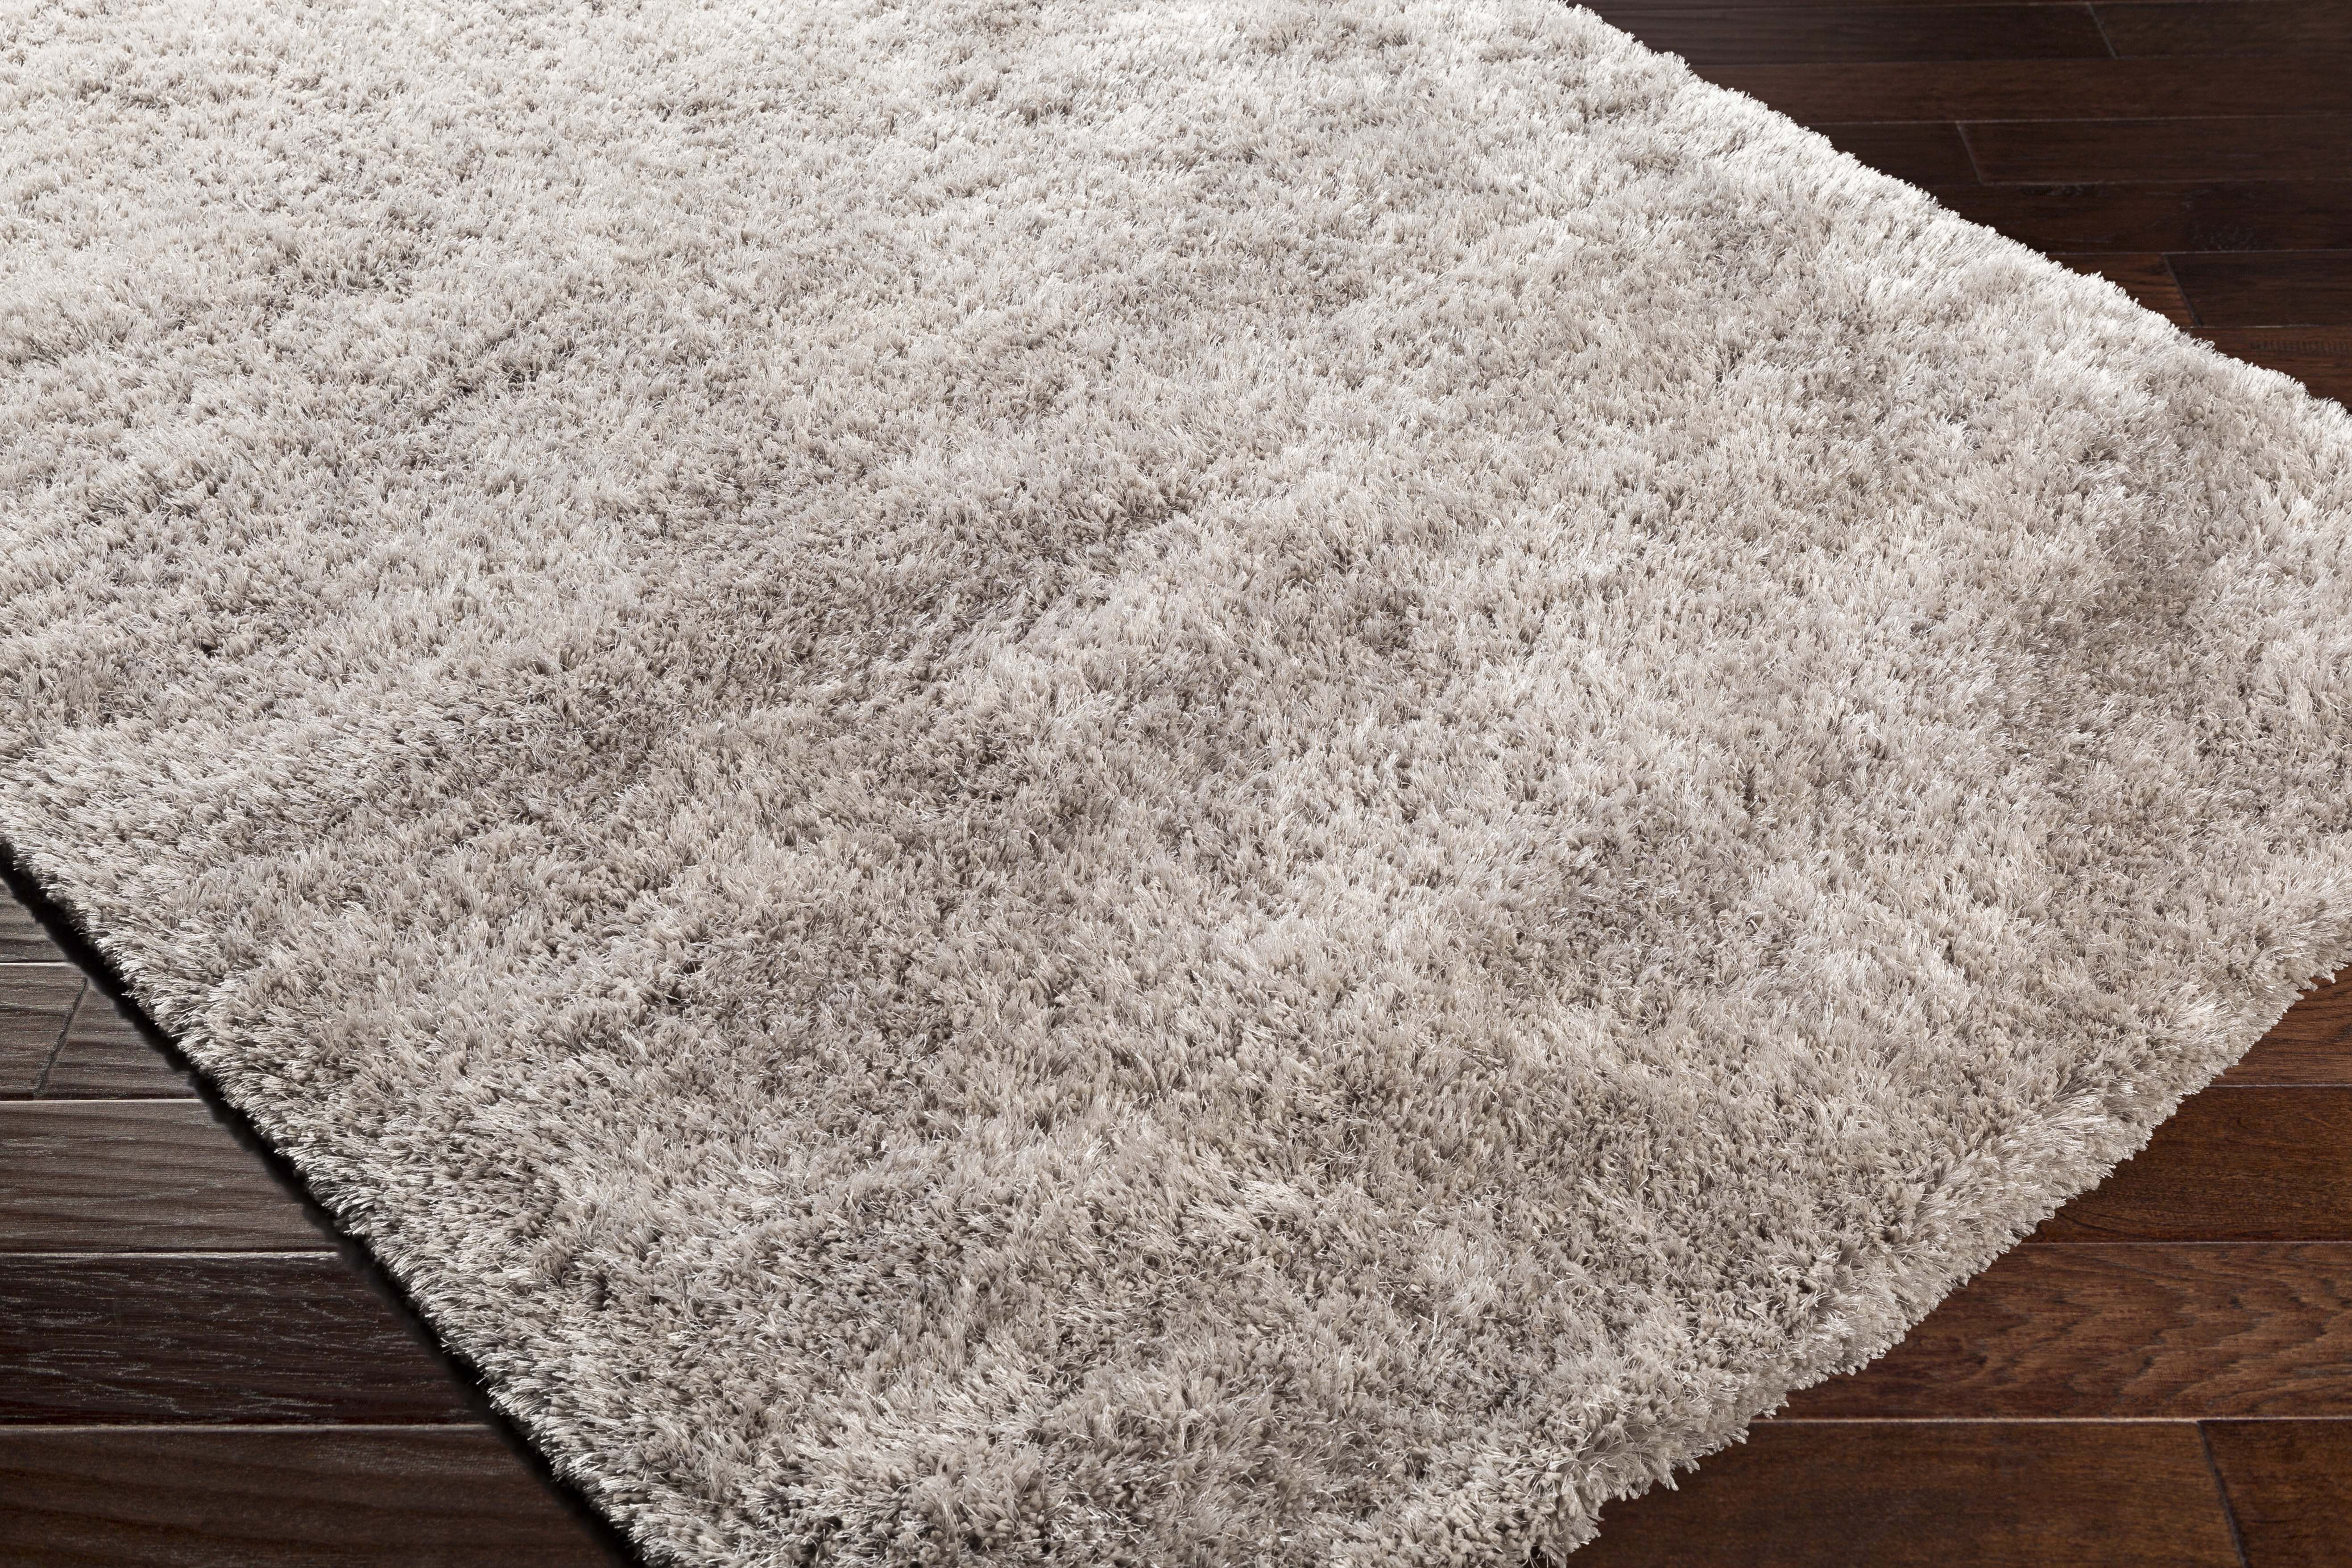 Grizzly Rug, 2' x 3' - Image 6